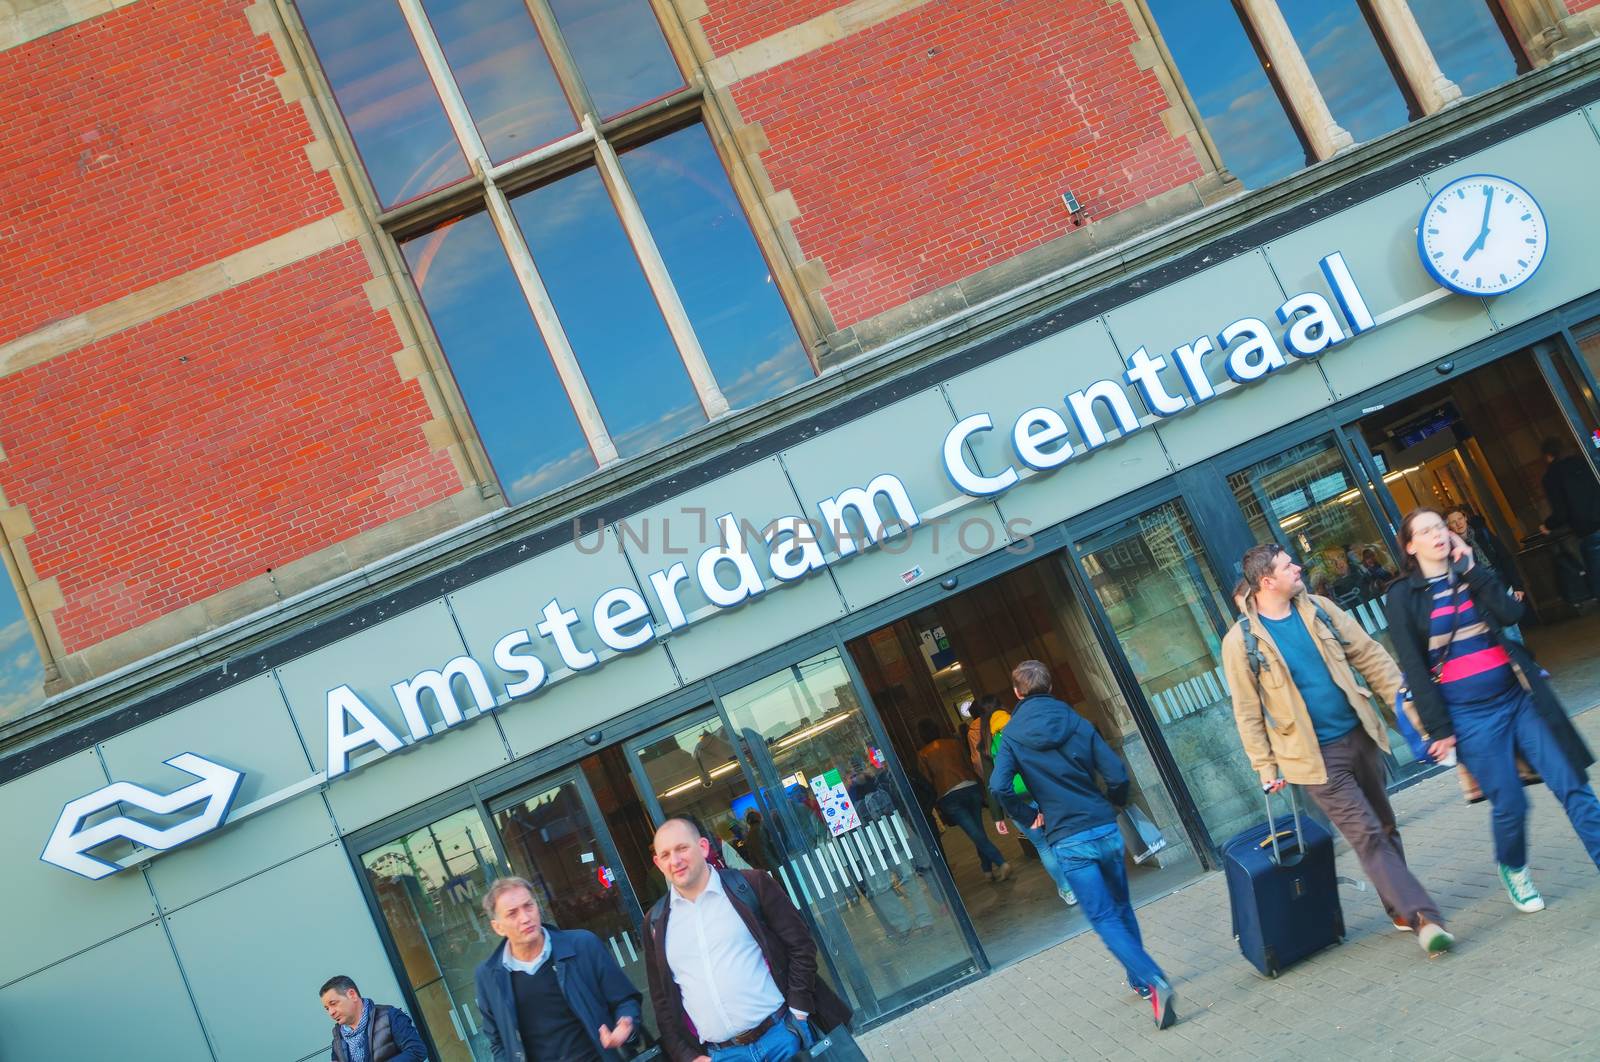 Entrance to the Amsterdam Centraal railway station by AndreyKr